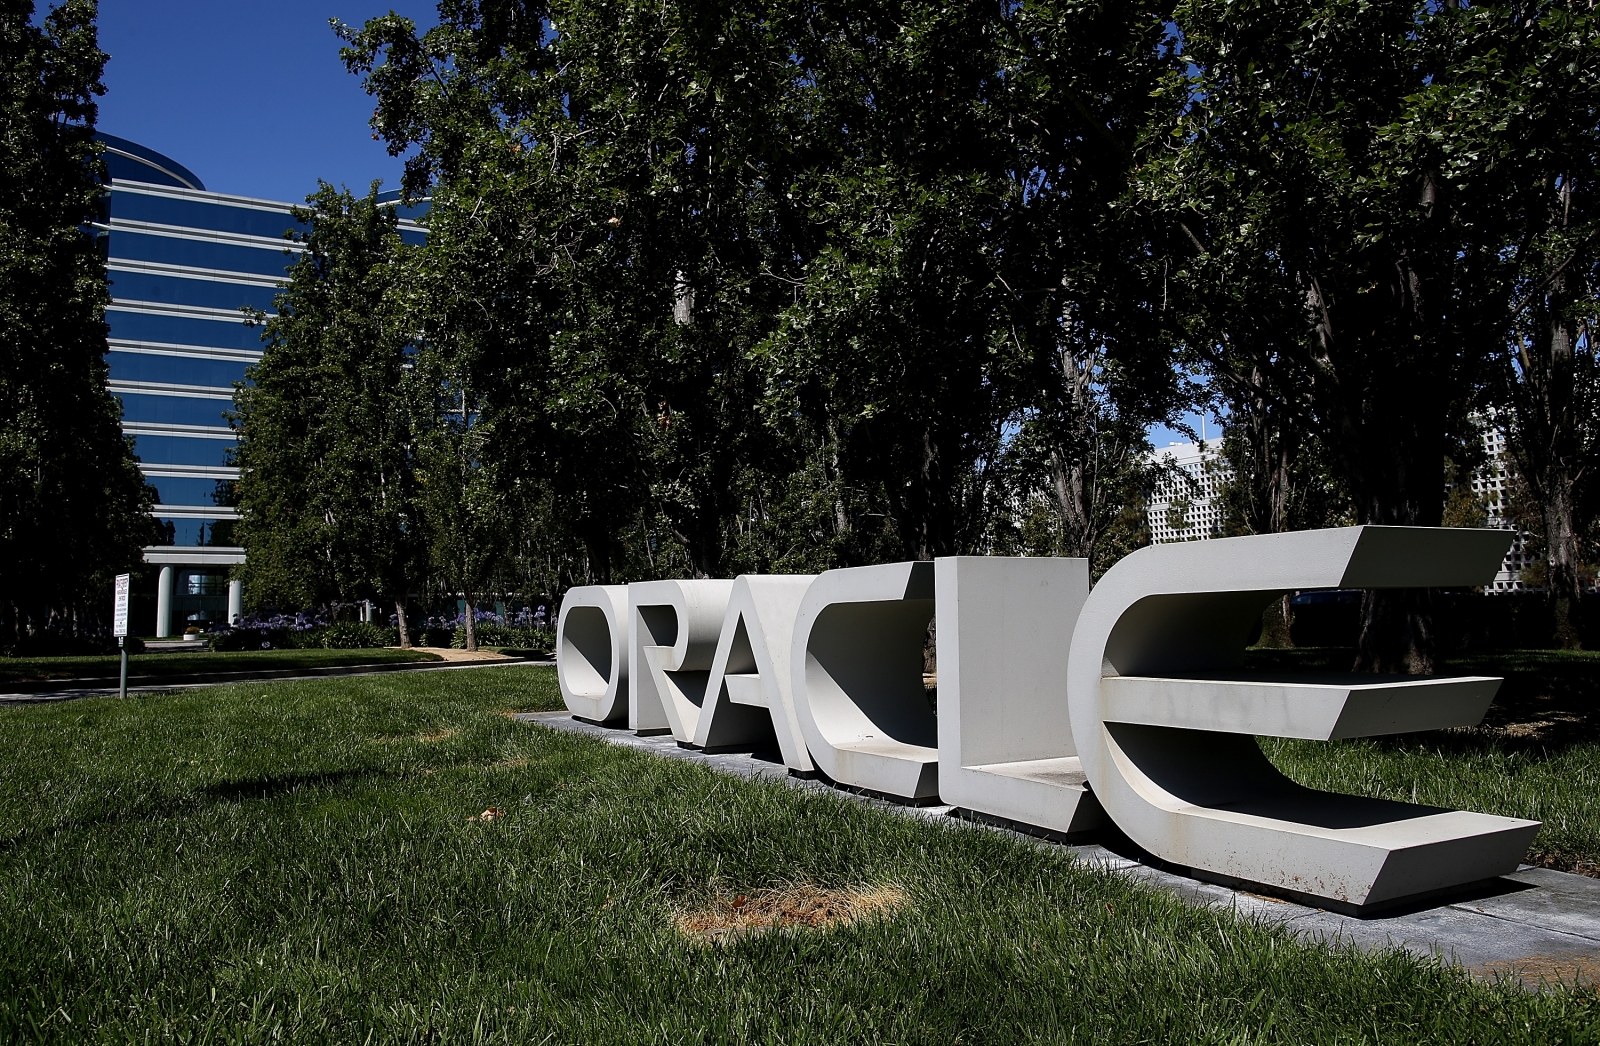 D2/ea/oracle-commits-3-million-dollars-to-support-stem-education-for-girls.jpg